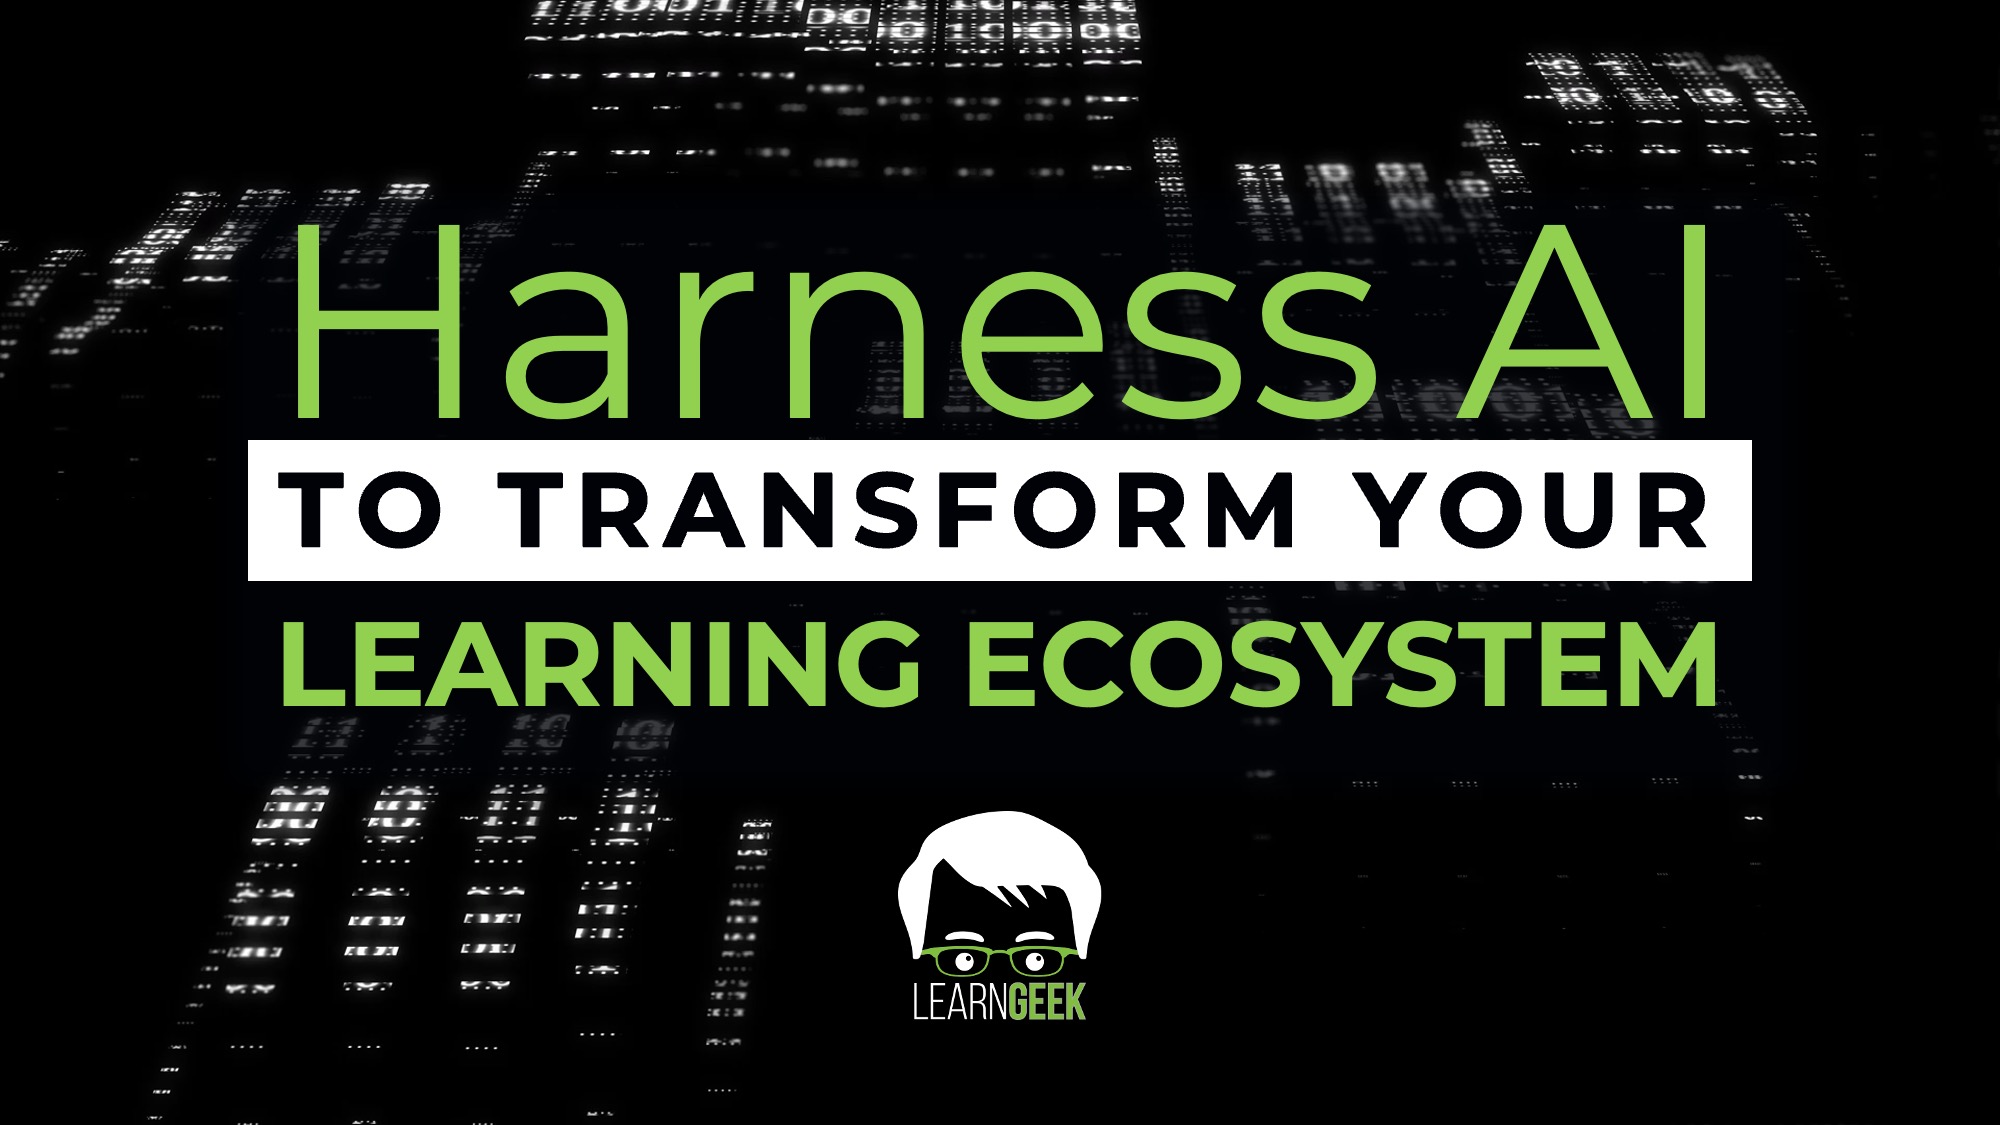 Harness AI to Transform Your Learning Ecosystem